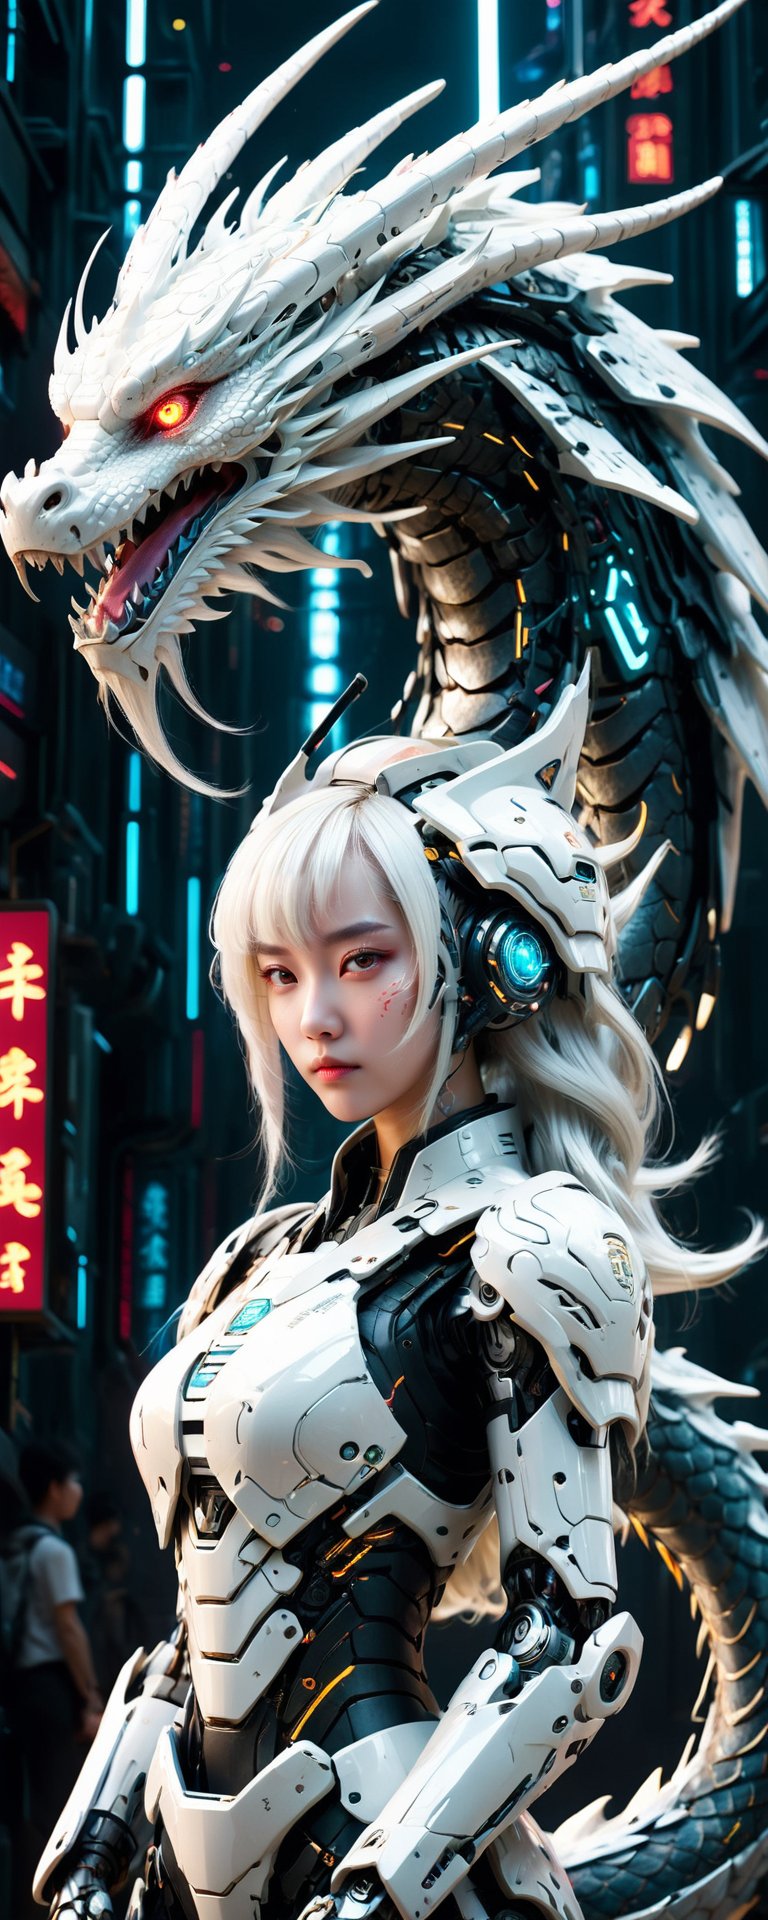 Full body,  outer_space,  robot female, human face, dragon skin, dragon scale pattern ,holding dragon head weapon, with long white hair,dragon-themed, complex background:1.1,Chinese Dragon,Mecha,Cyberpunk